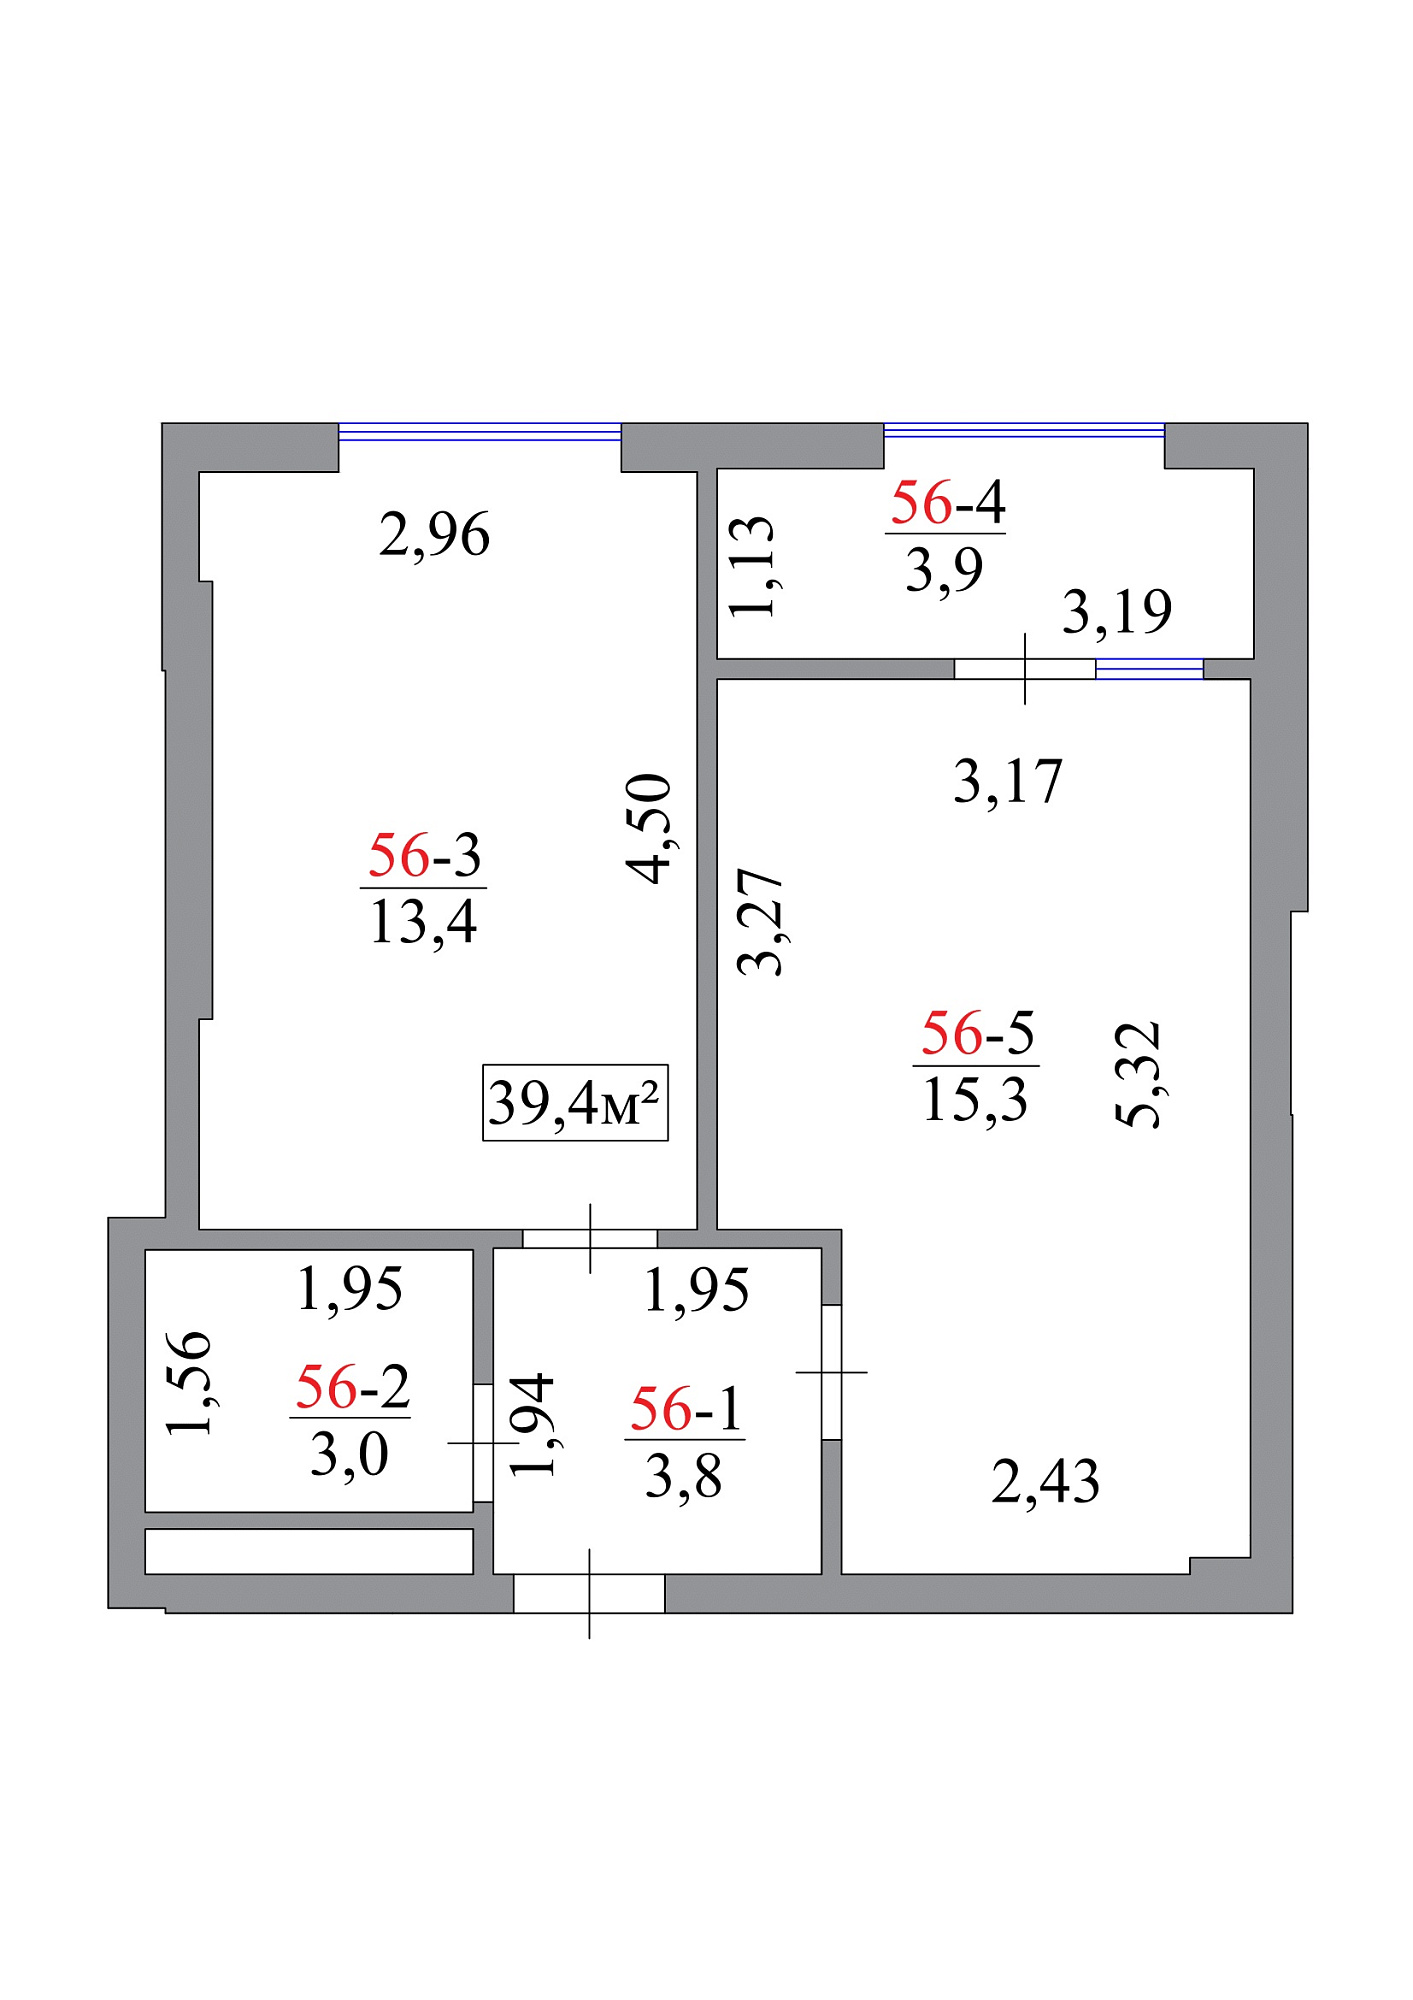 Planning 1-rm flats area 39.4m2, AB-07-06/00051.